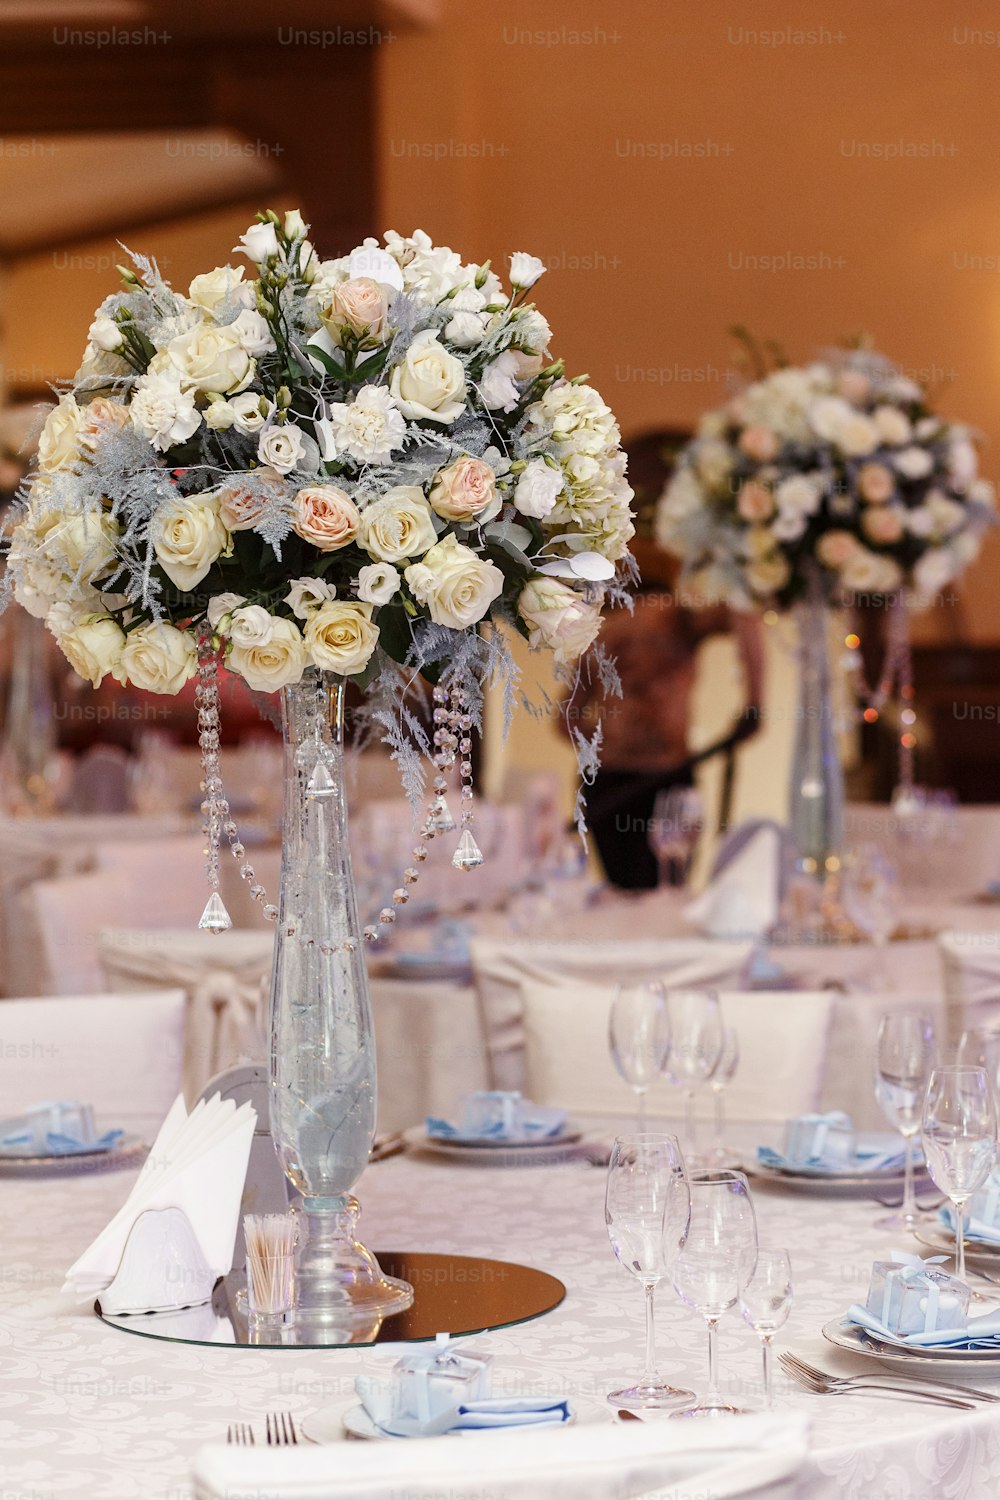 luxury wedding decor with flowers and glass vases with jewels on round tables. arrangements of decorations at wedding reception. expensive catering. space for text